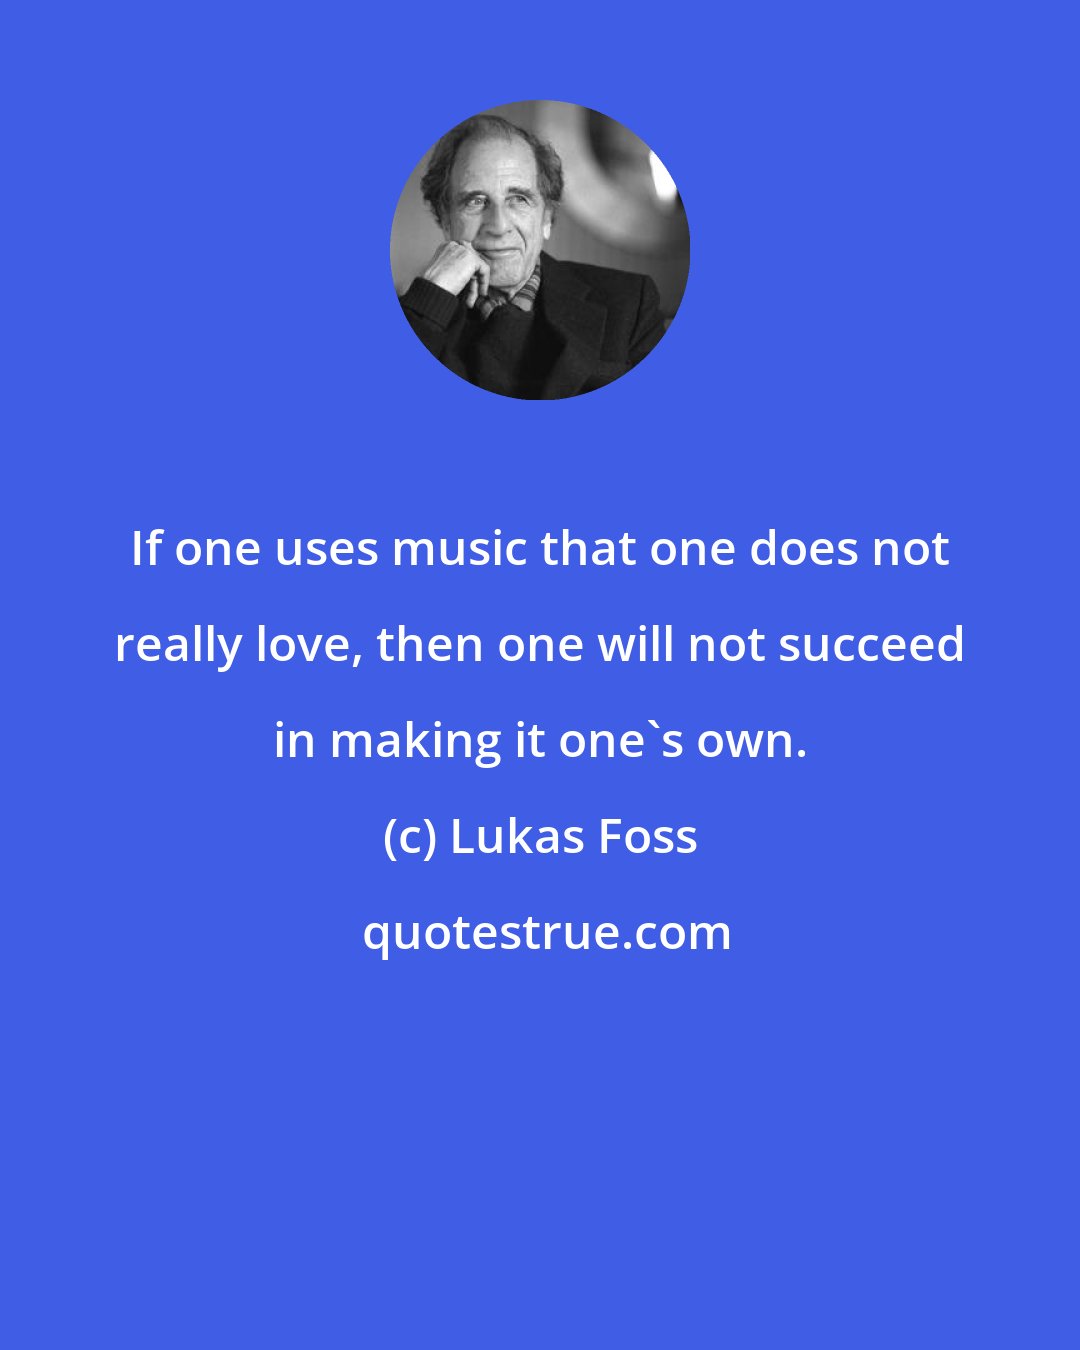 Lukas Foss: If one uses music that one does not really love, then one will not succeed in making it one's own.